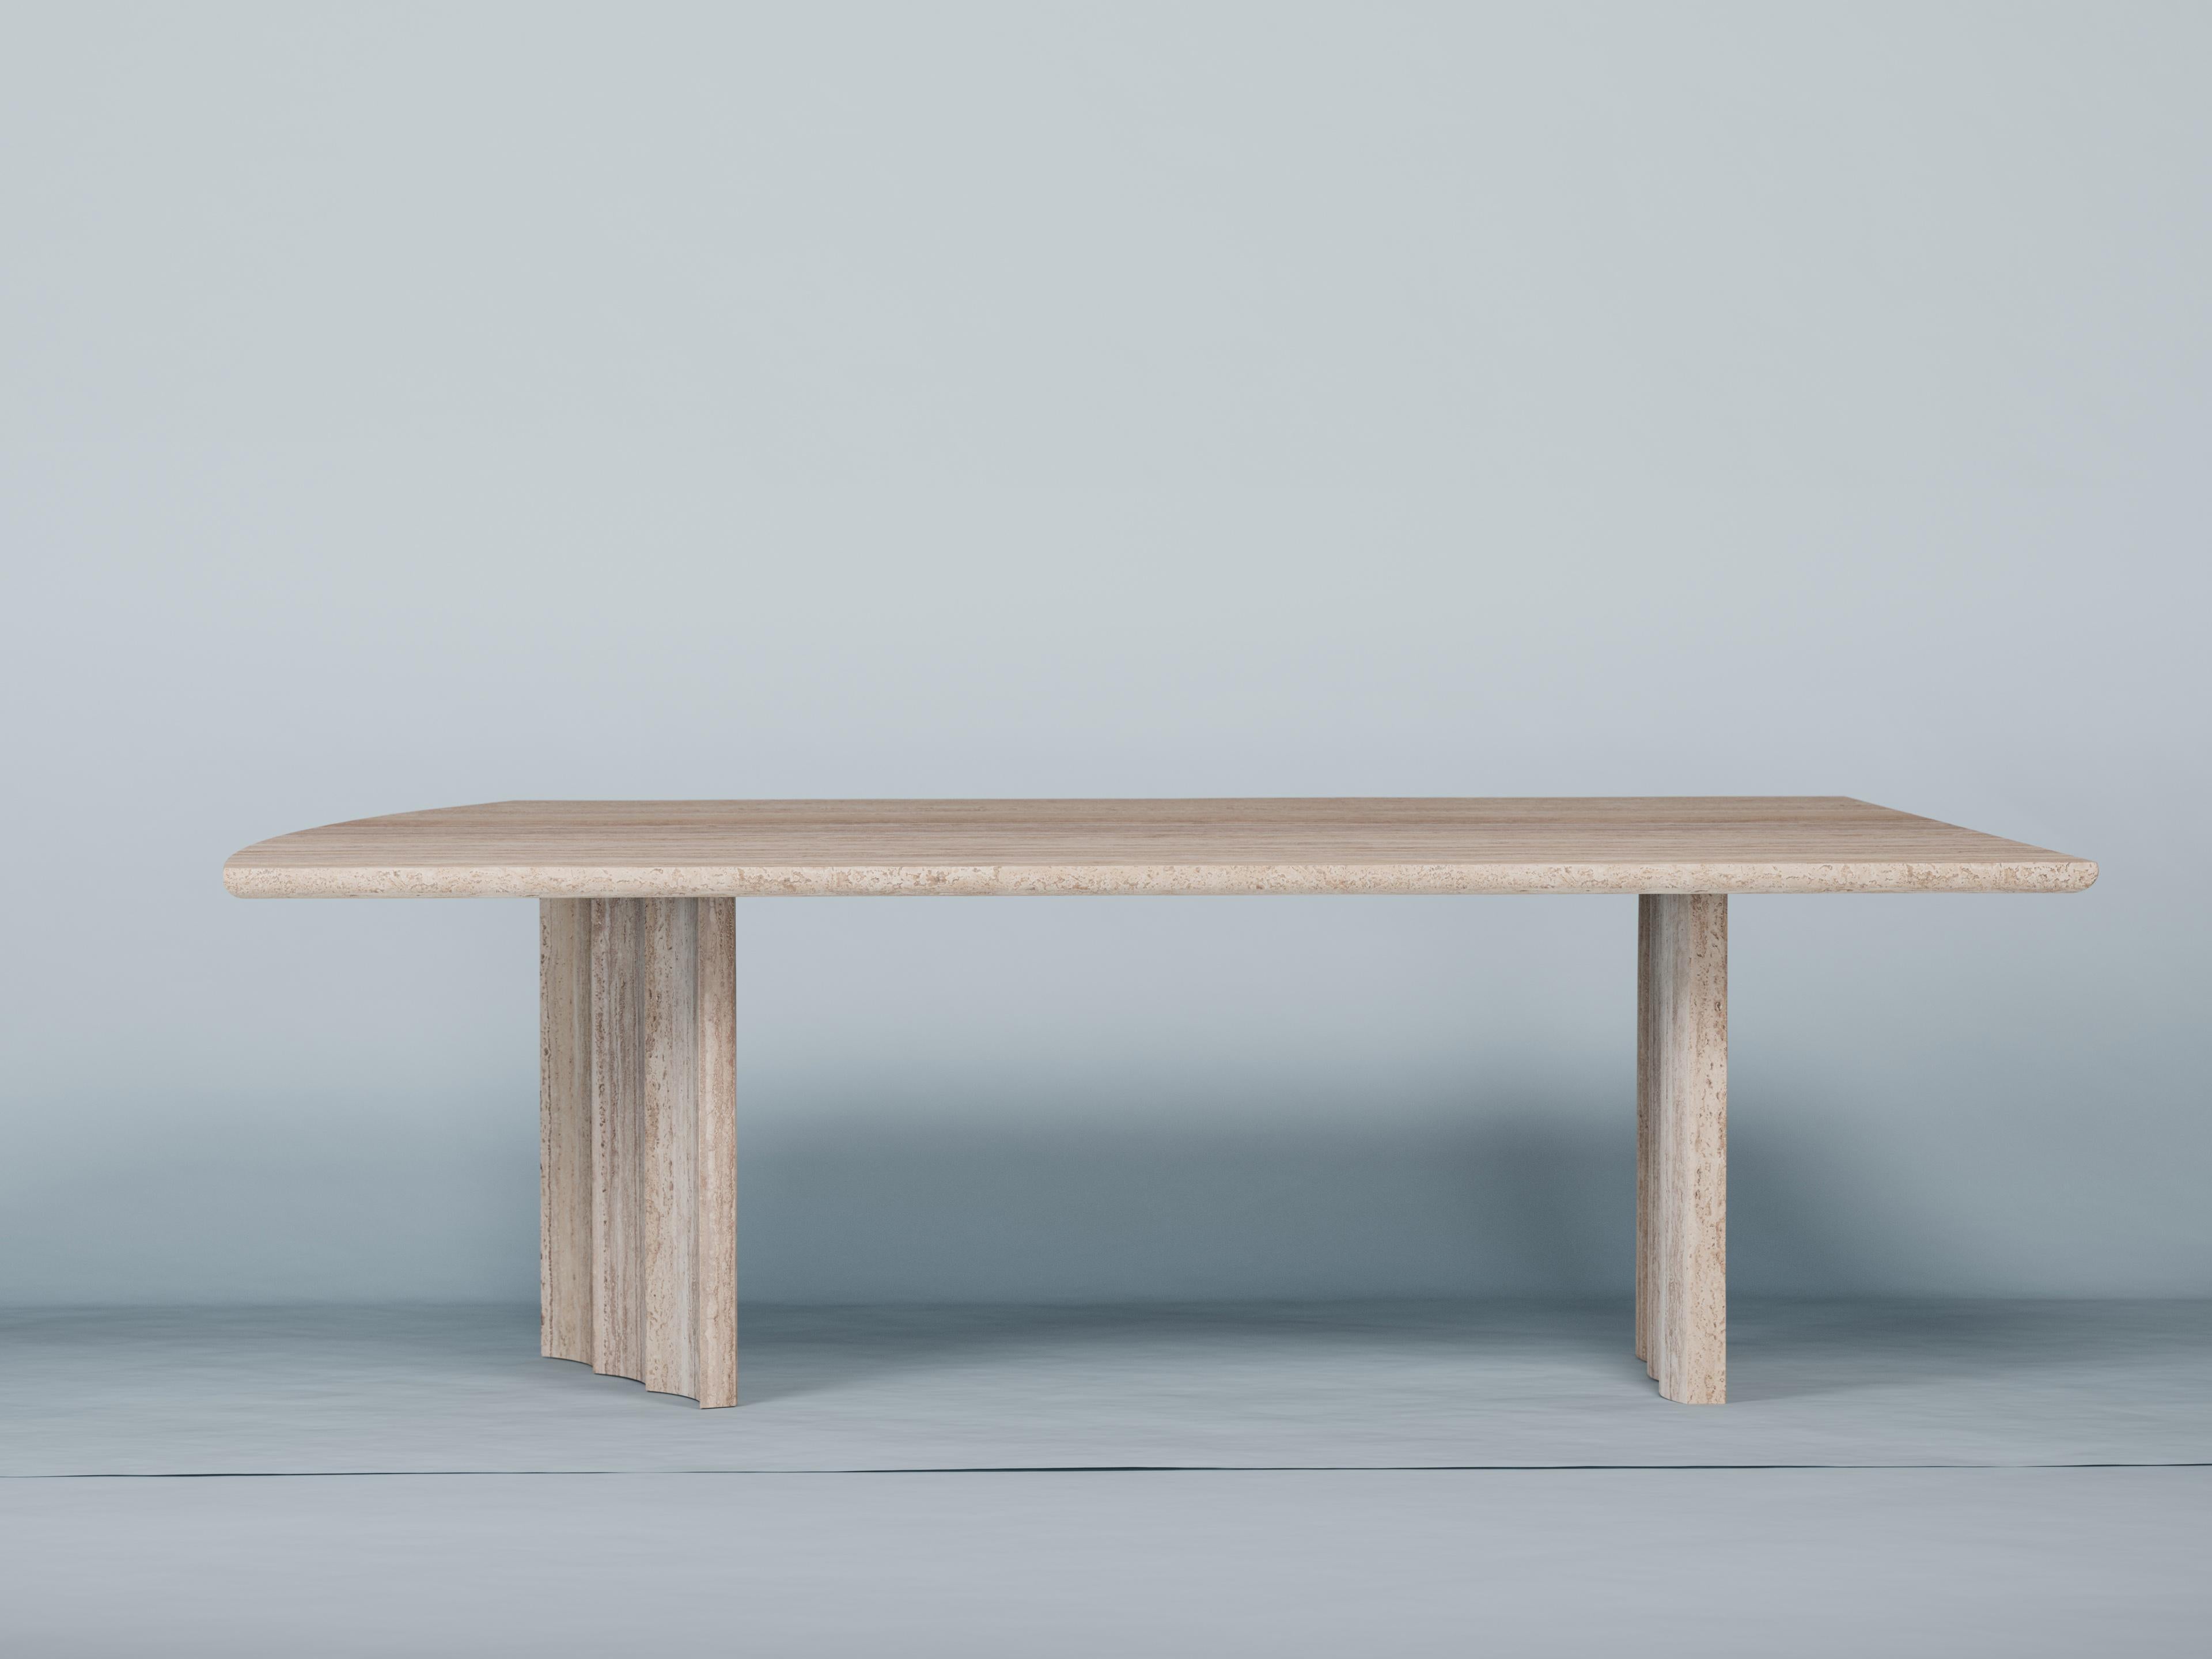 Travertine dining table by Tino Seubert
Dimensions: D 240 x W 100 x H 73 cm.
Materials: Travertine.

Tino Seubert
When he first made his now signature wicker and aluminium stools and benches in 2018 for a show at the Hepworth Gallery in